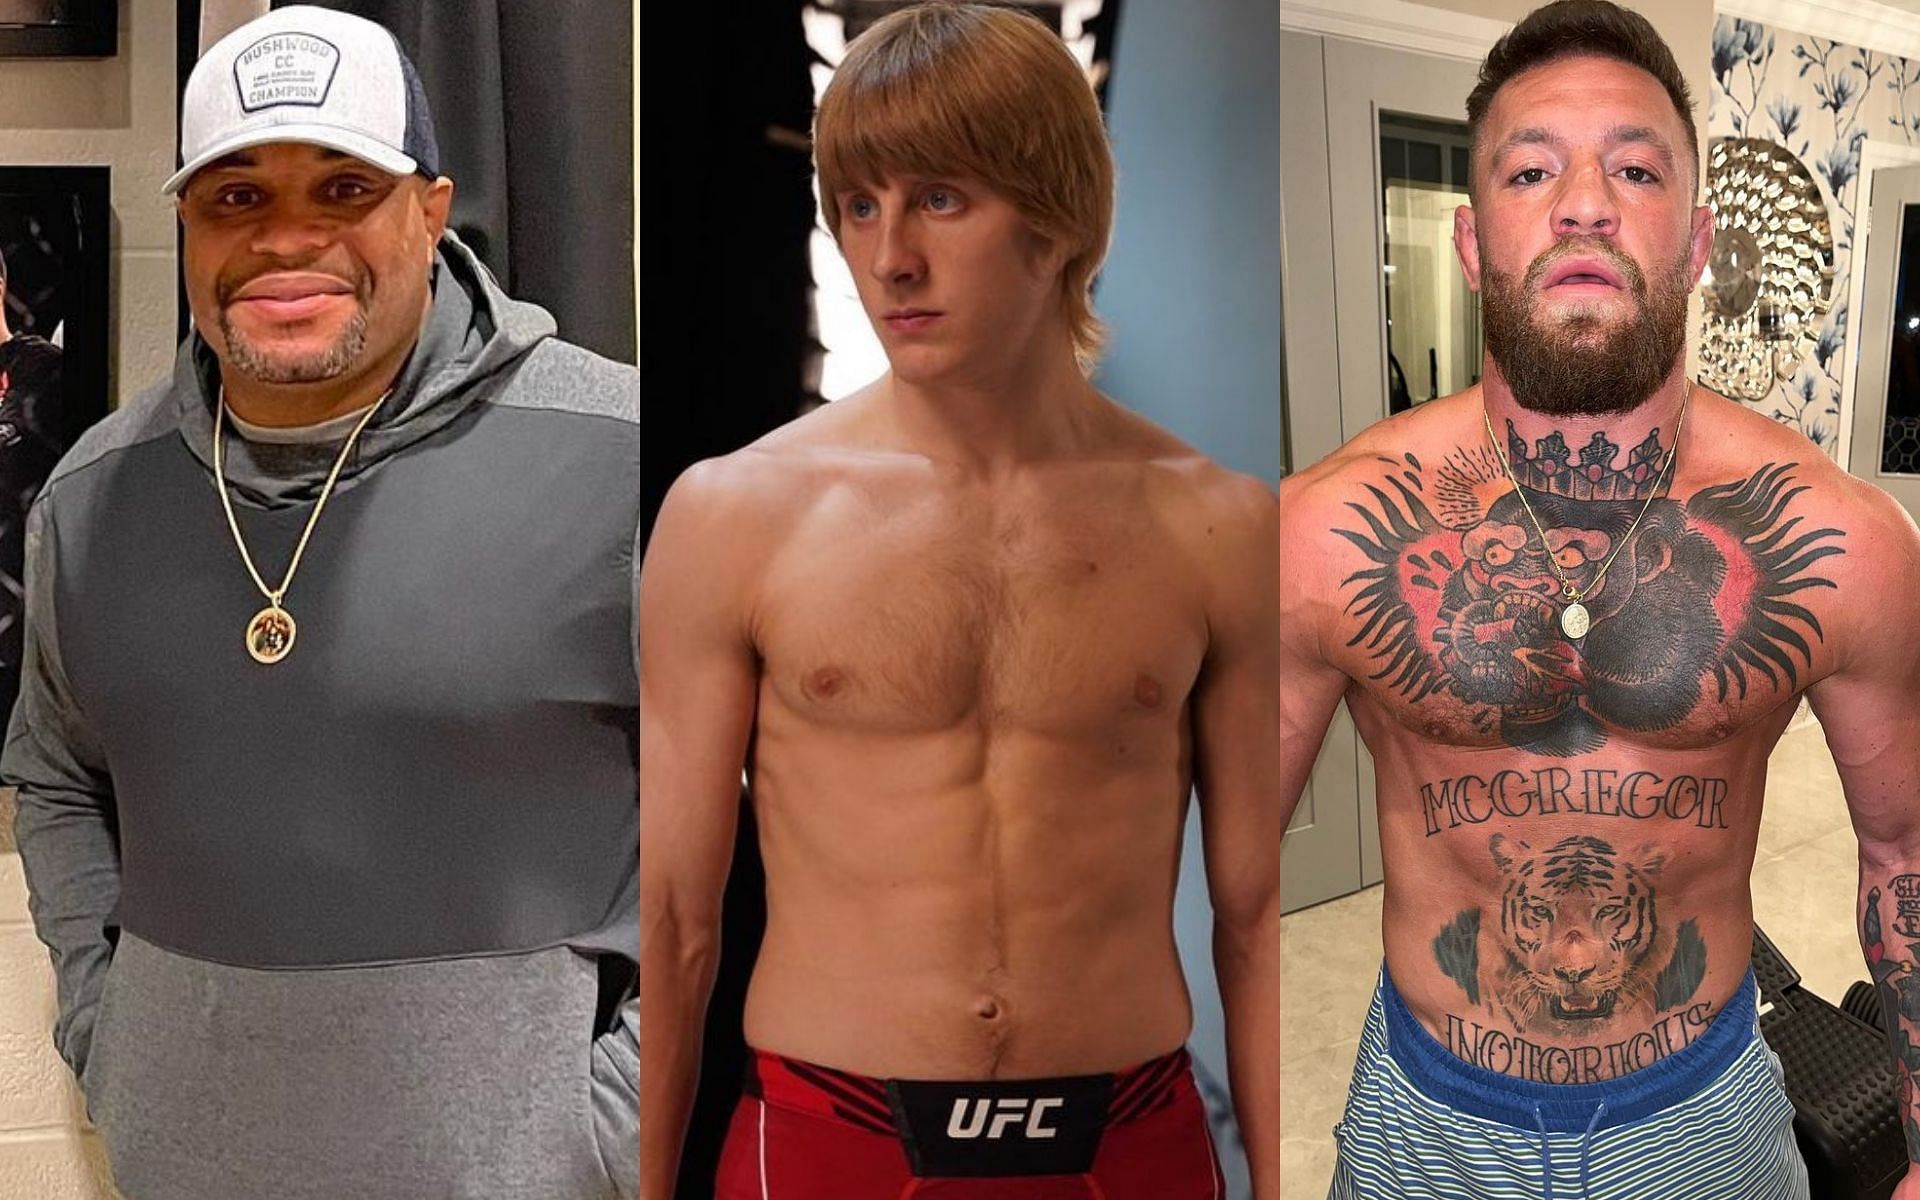 (L to R) Daniel Cormier, Paddy Pimblett and Conor McGregor @dc_mma, @thebaddyufc and @thenotoriousmma